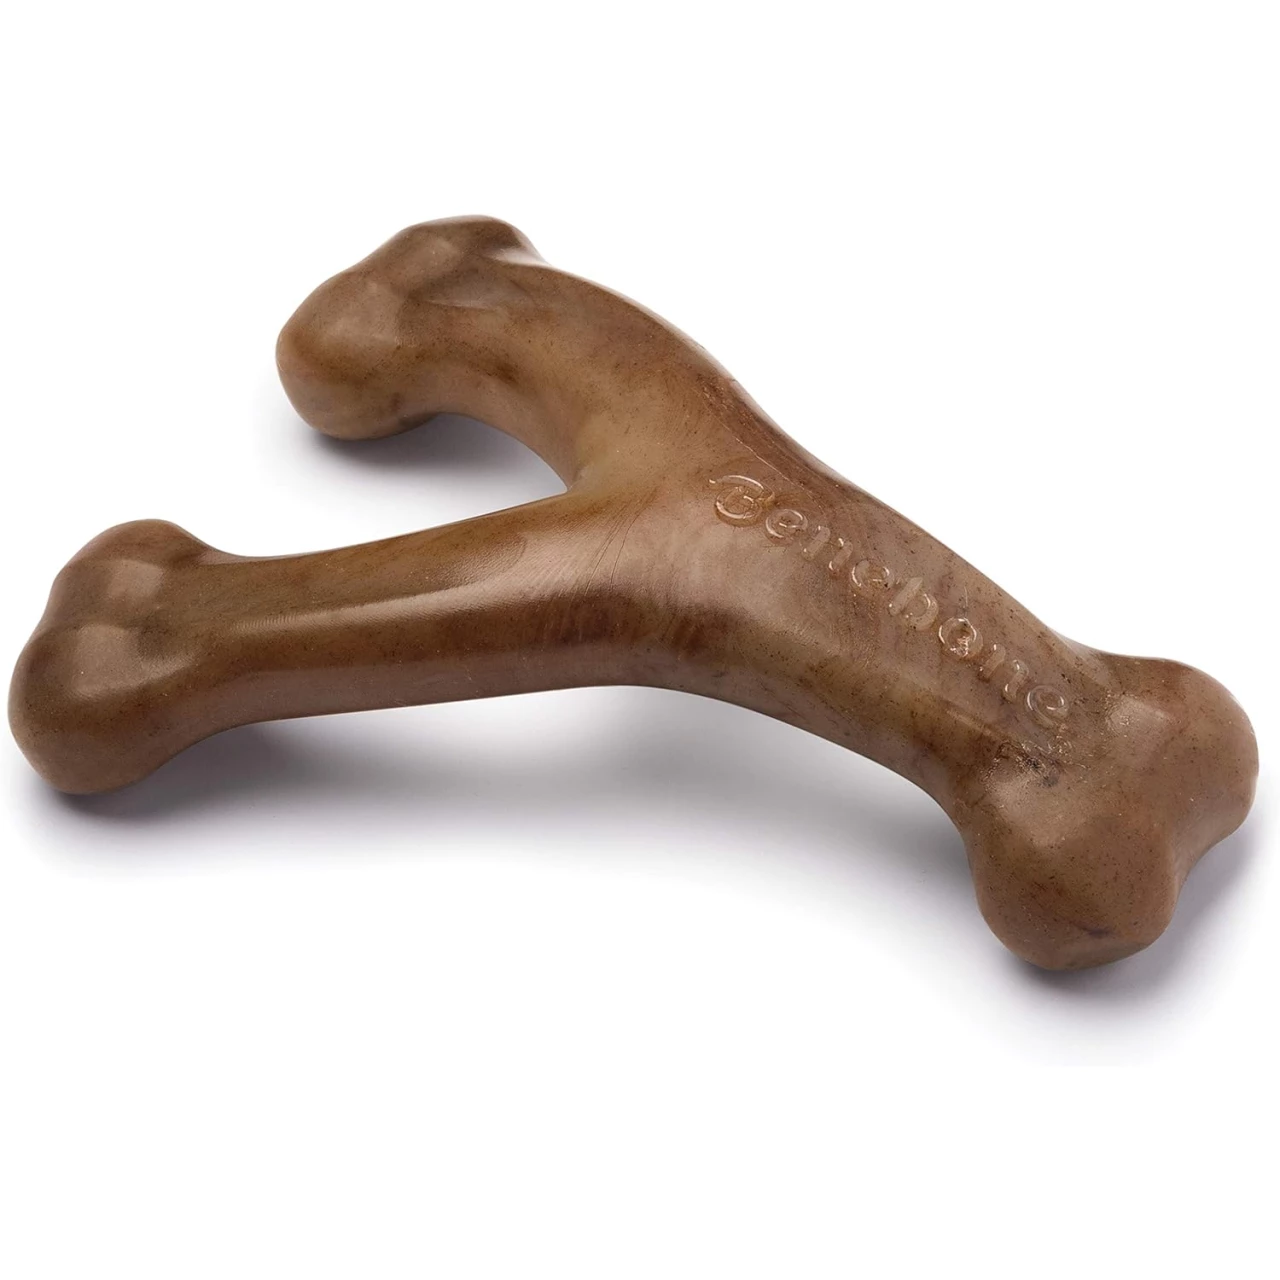 Benebone Wishbone Durable Dog Chew Toy for Aggressive Chewers, Made in USA, Small, Real Bacon Flavor